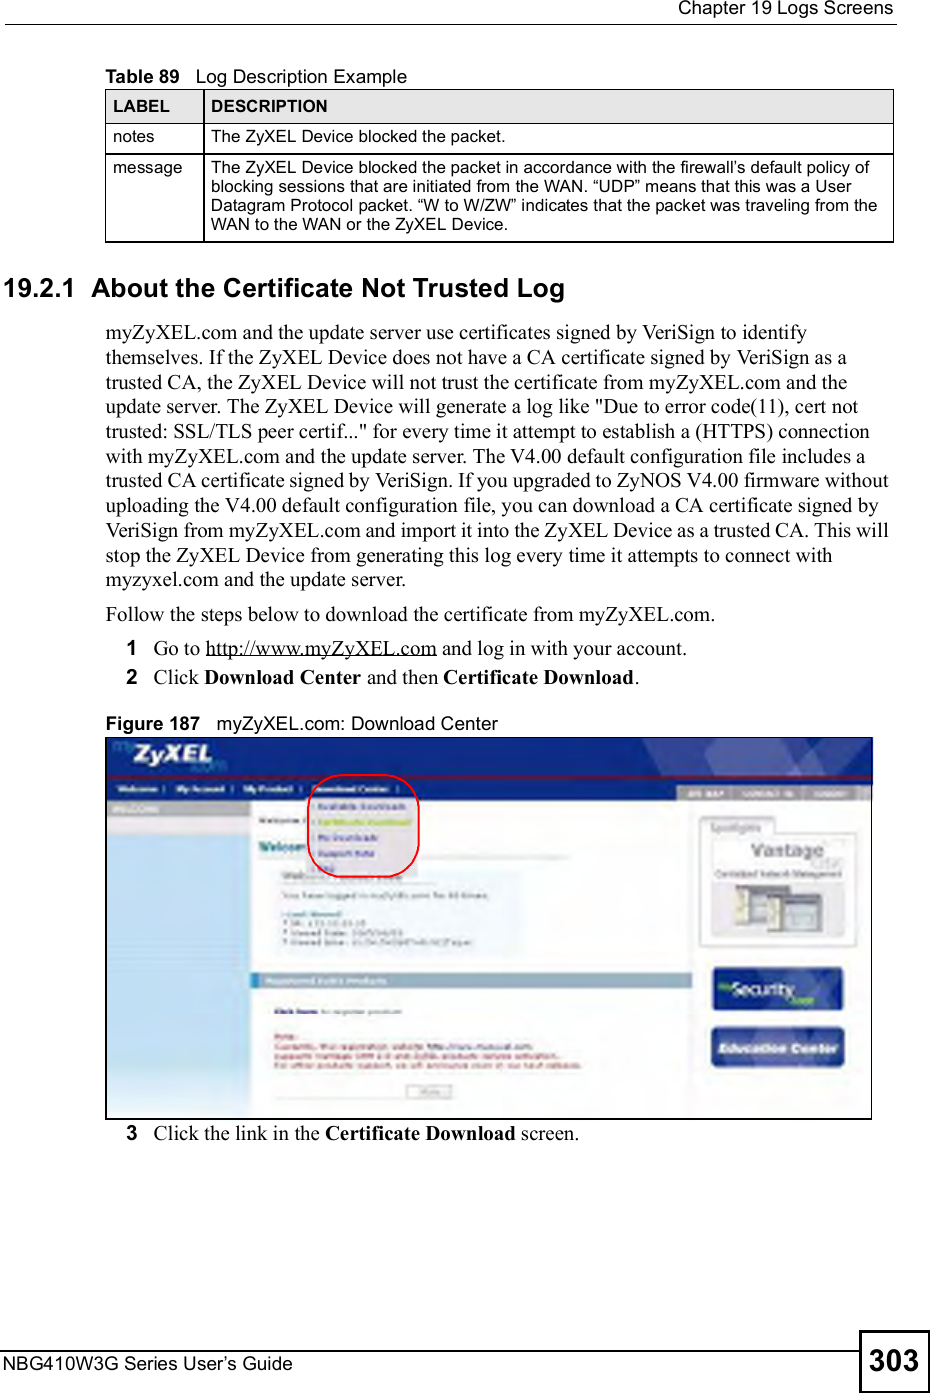  Chapter 19Logs ScreensNBG410W3G Series User s Guide 30319.2.1  About the Certificate Not Trusted LogmyZyXEL.com and the update server use certificates signed by VeriSign to identify themselves. If the ZyXEL Device does not have a CA certificate signed by VeriSign as a trusted CA, the ZyXEL Device will not trust the certificate from myZyXEL.com and the update server. The ZyXEL Device will generate a log like &quot;Due to error code(11), cert not trusted: SSL/TLS peer certif...&quot; for every time it attempt to establish a (HTTPS) connection with myZyXEL.com and the update server. The V4.00 default configuration file includes a trusted CA certificate signed by VeriSign. If you upgraded to ZyNOS V4.00 firmware without uploading the V4.00 default configuration file, you can download a CA certificate signed by VeriSign from myZyXEL.com and import it into the ZyXEL Device as a trusted CA. This will stop the ZyXEL Device from generating this log every time it attempts to connect with myzyxel.com and the update server.Follow the steps below to download the certificate from myZyXEL.com.1Go to http://www.myZyXEL.com and log in with your account.2Click Download Center and then Certificate Download.Figure 187   myZyXEL.com: Download Center3Click the link in the Certificate Download screen.notes The ZyXEL Device blocked the packet.message The ZyXEL Device blocked the packet in accordance with the firewall s default policy of blocking sessions that are initiated from the WAN. &quot;UDP# means that this was a User Datagram Protocol packet. &quot;W to W/ZW# indicates that the packet was traveling from the WAN to the WAN or the ZyXEL Device. Table 89   Log Description ExampleLABEL DESCRIPTION